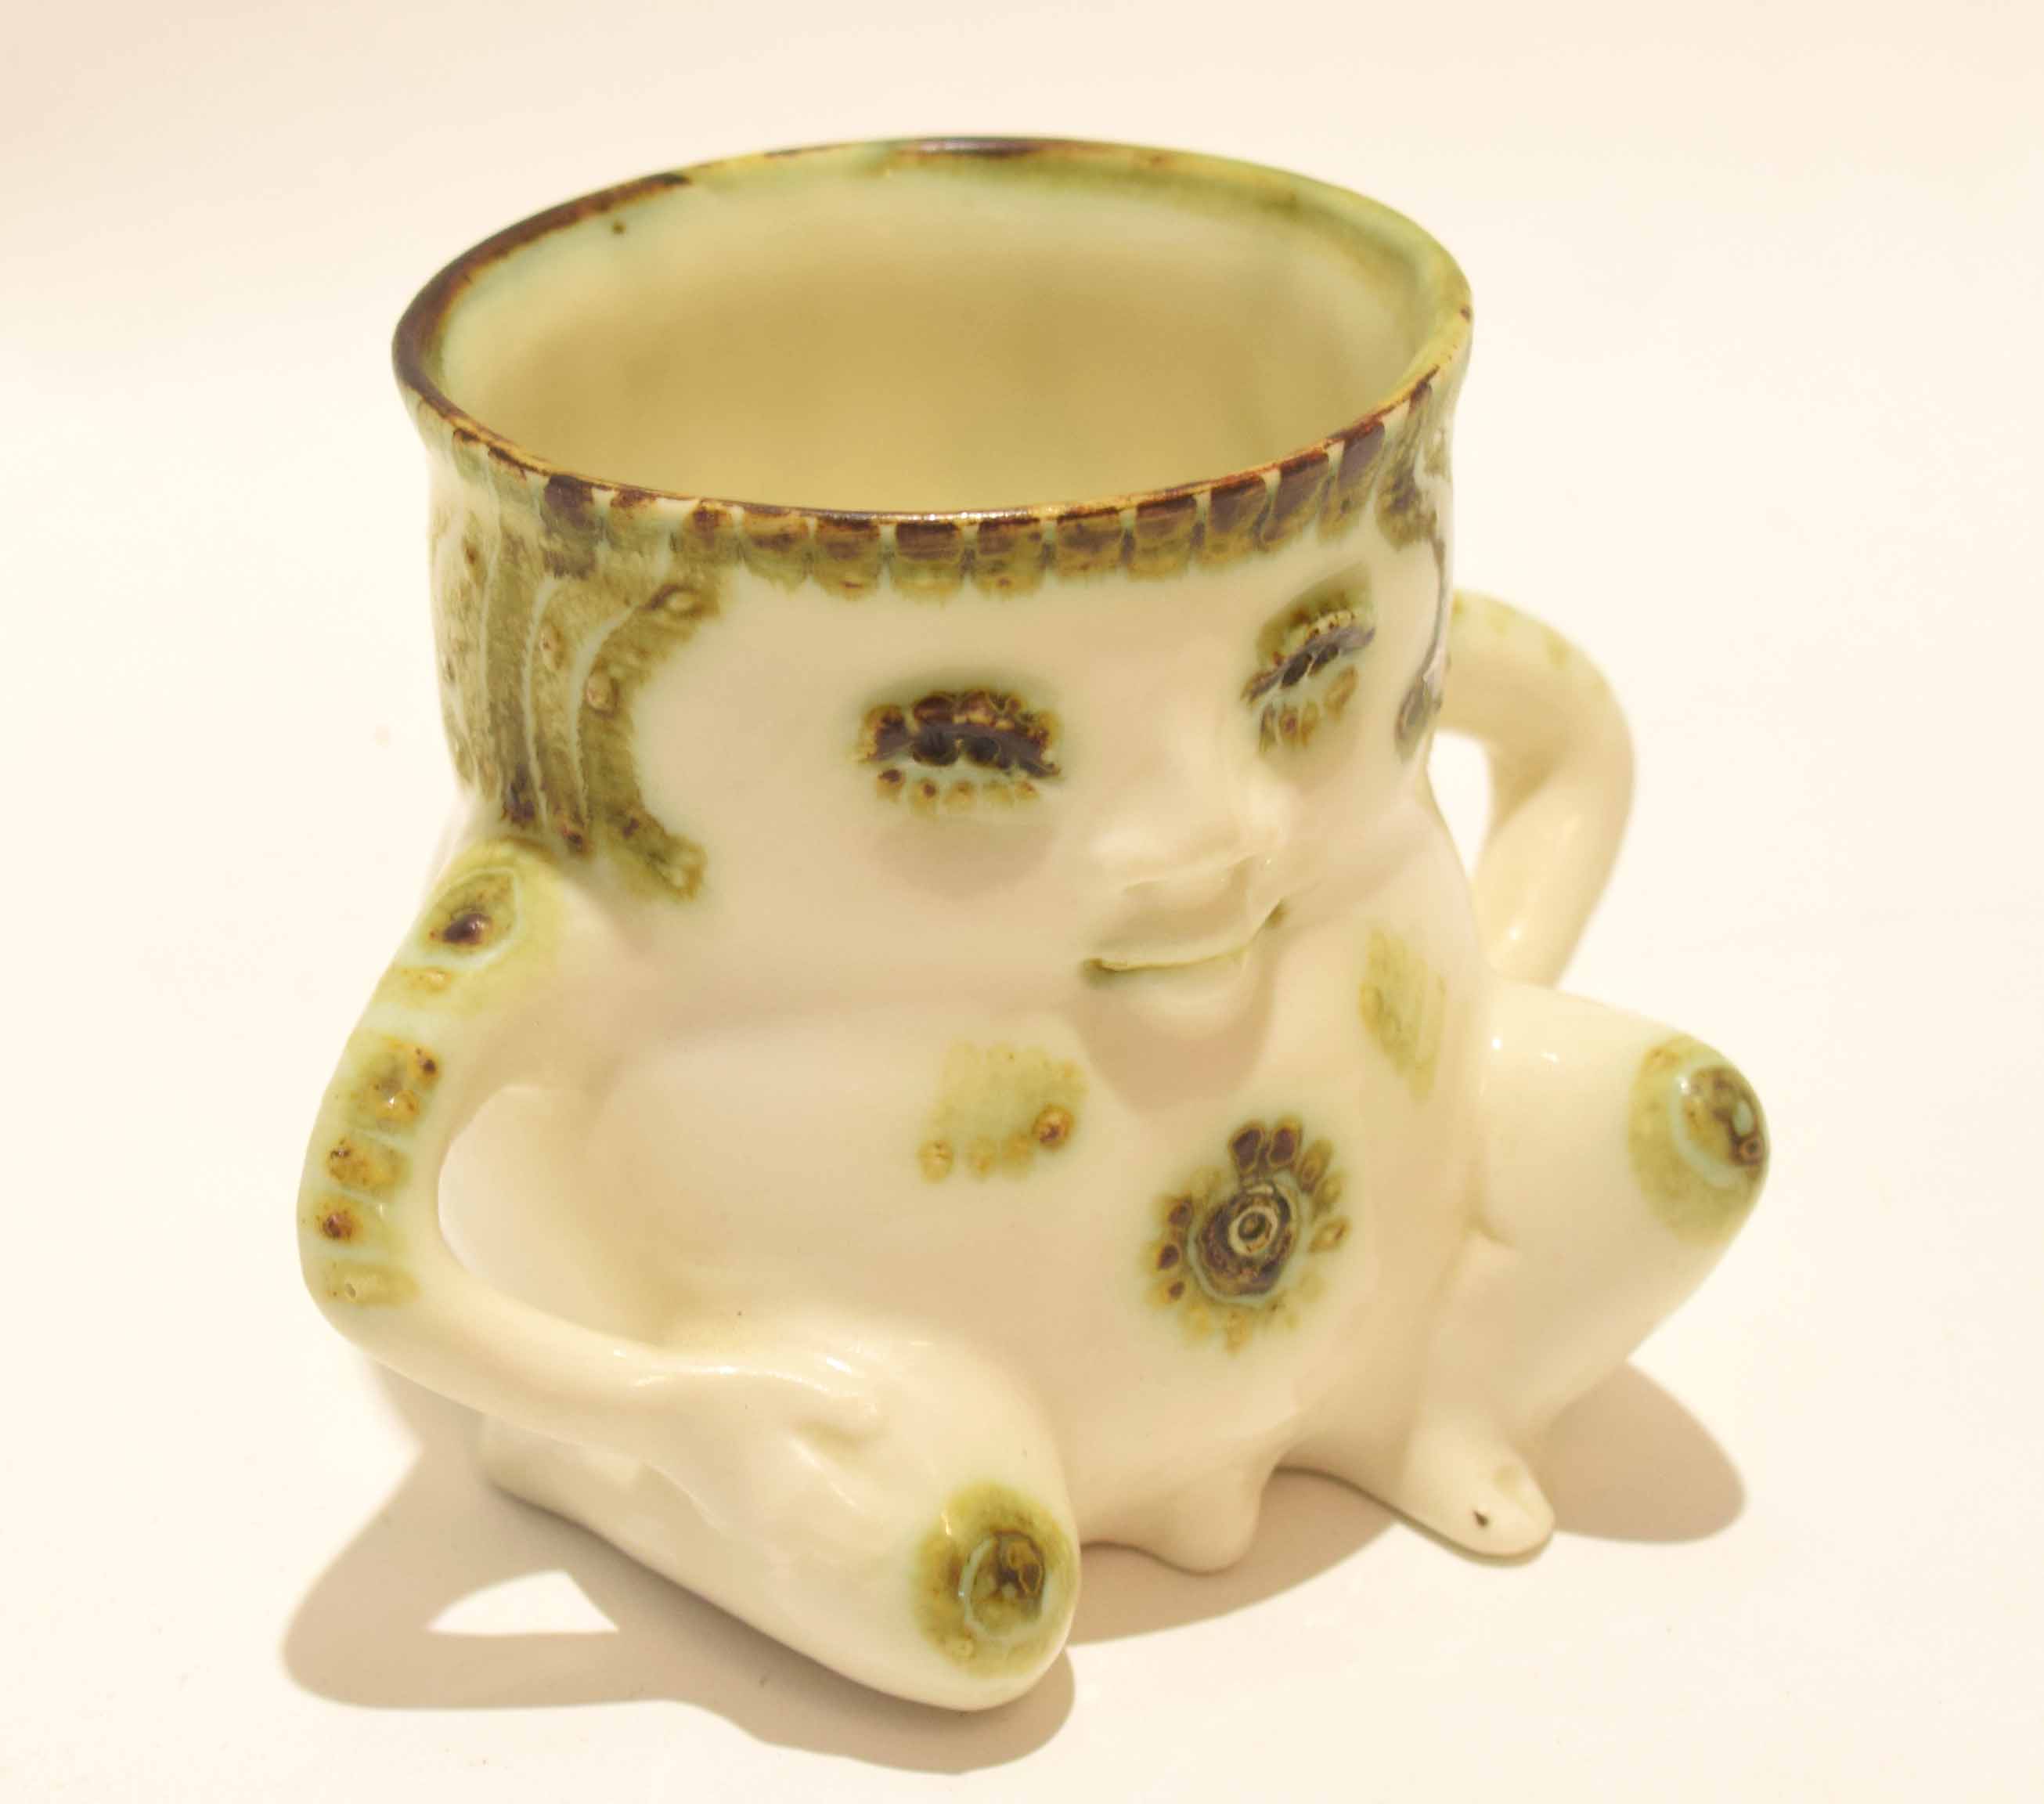 Pottery mug modelled with a face and the handles modelled as arms